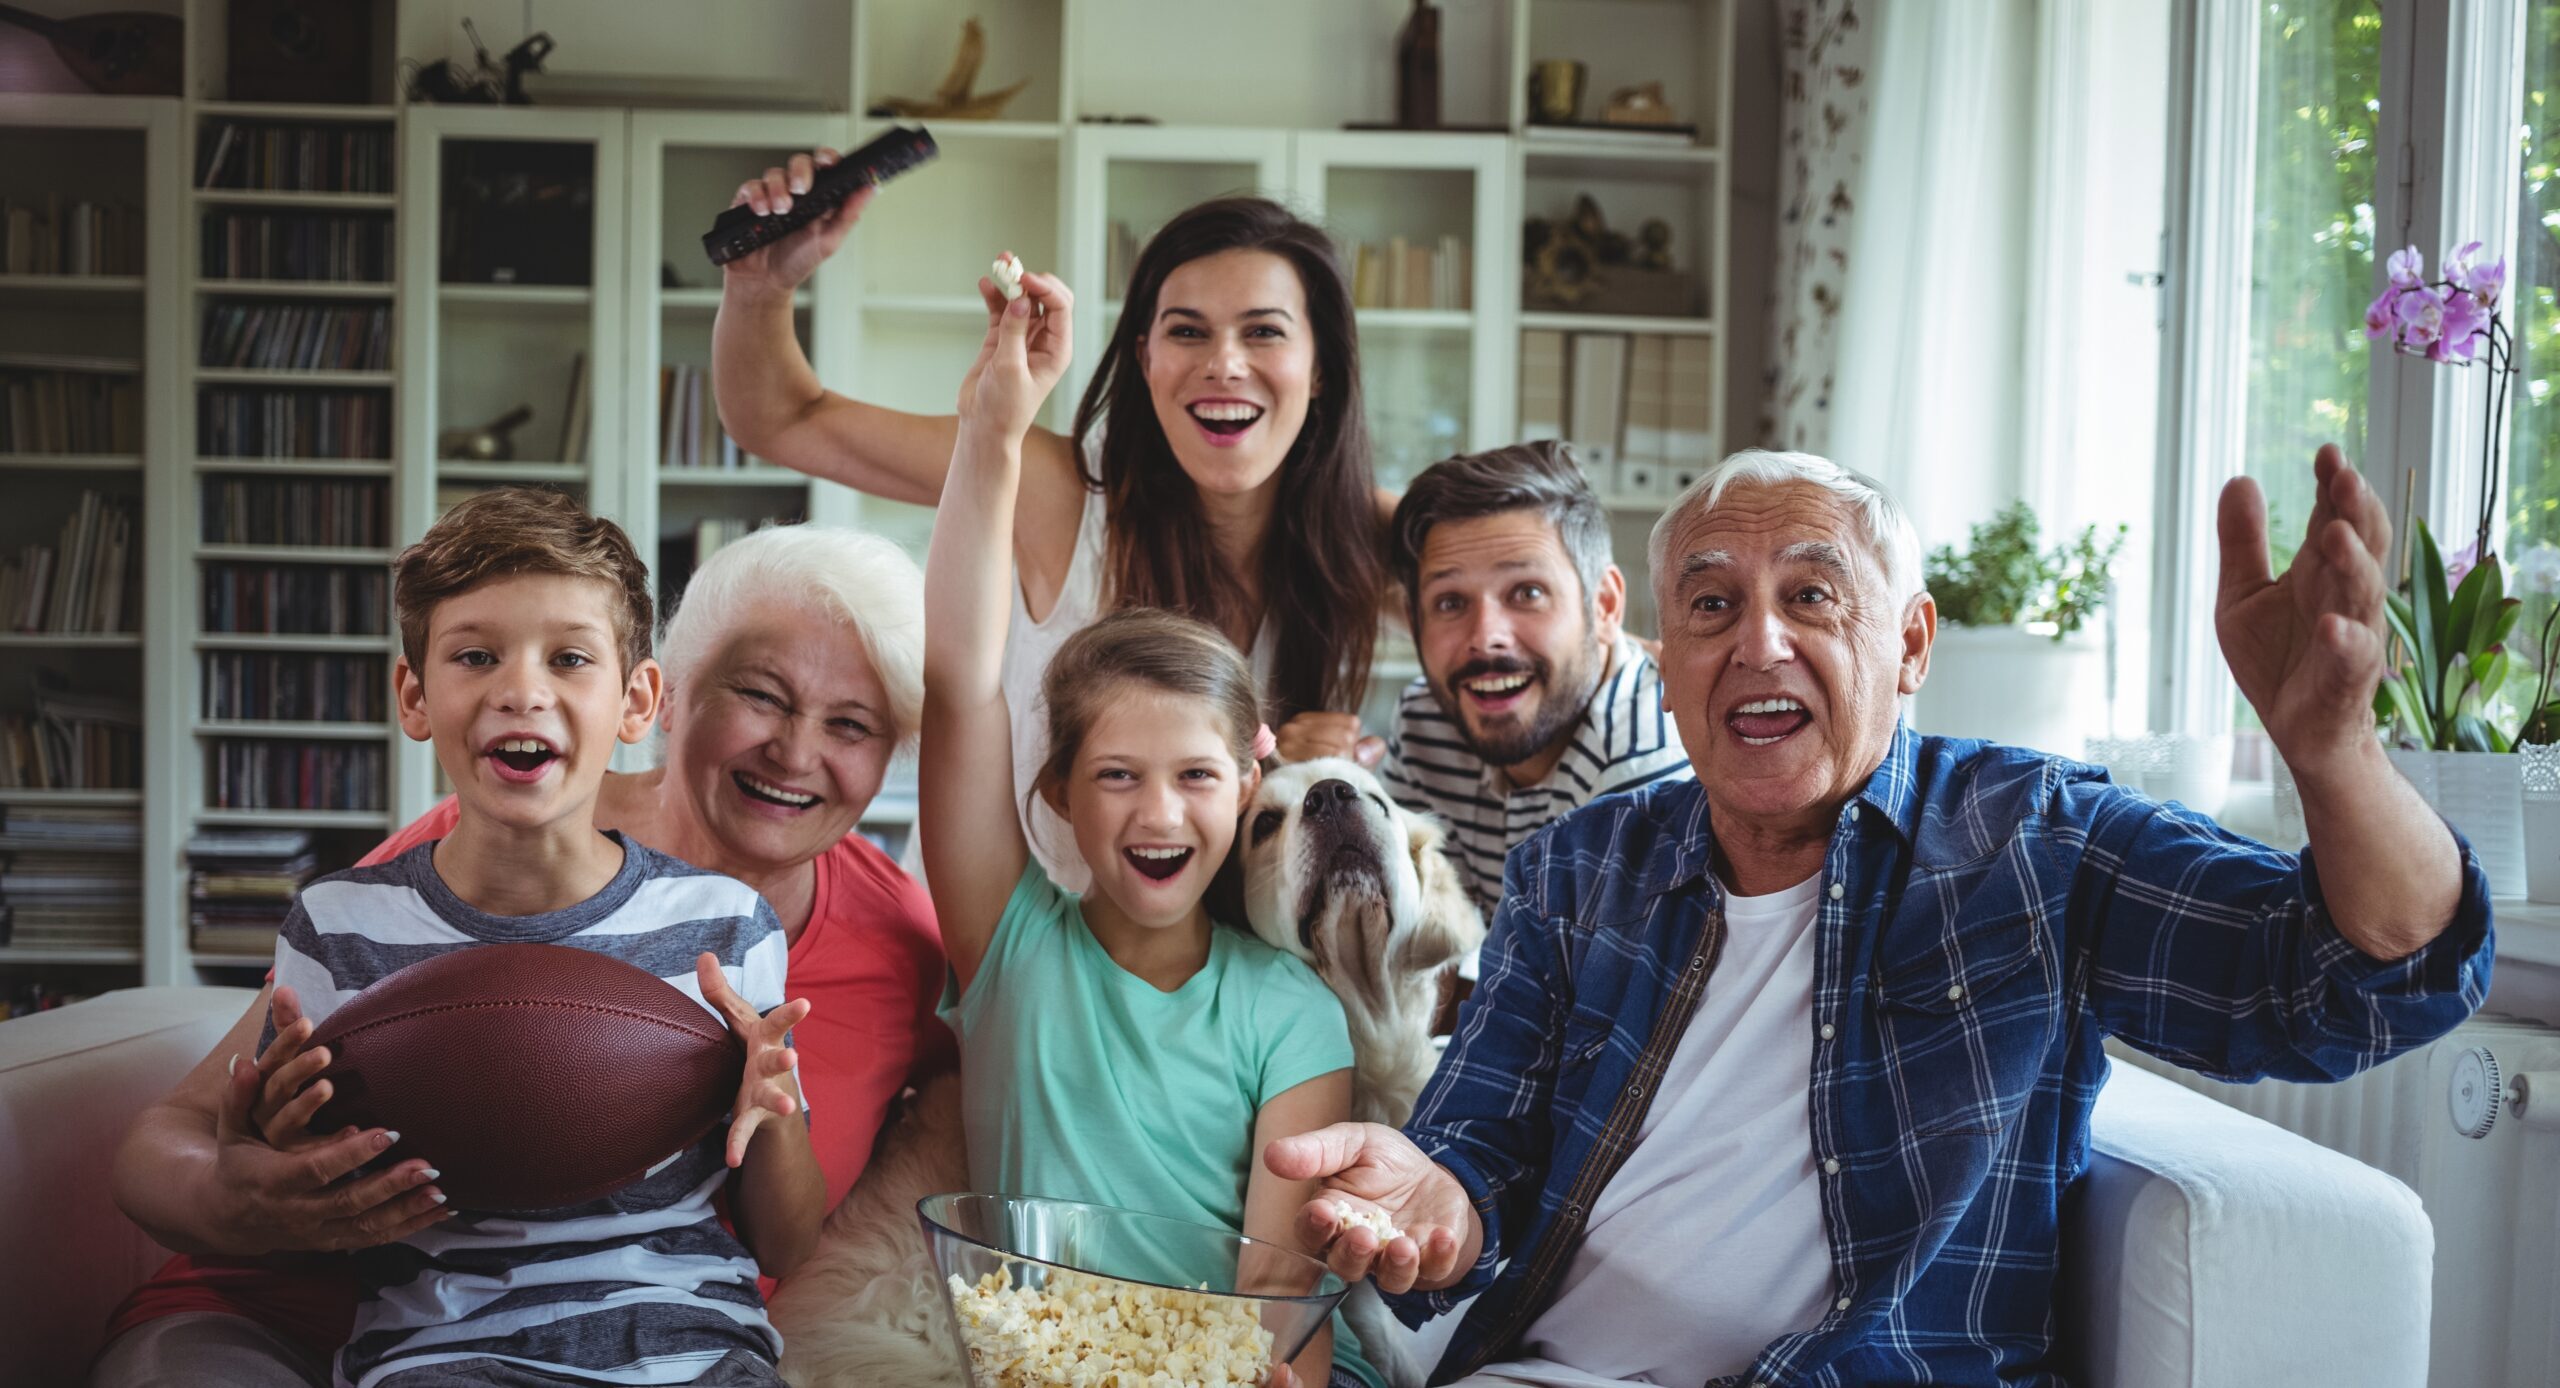 A family celebrates together from their living room couch with a bowl of popcorn.